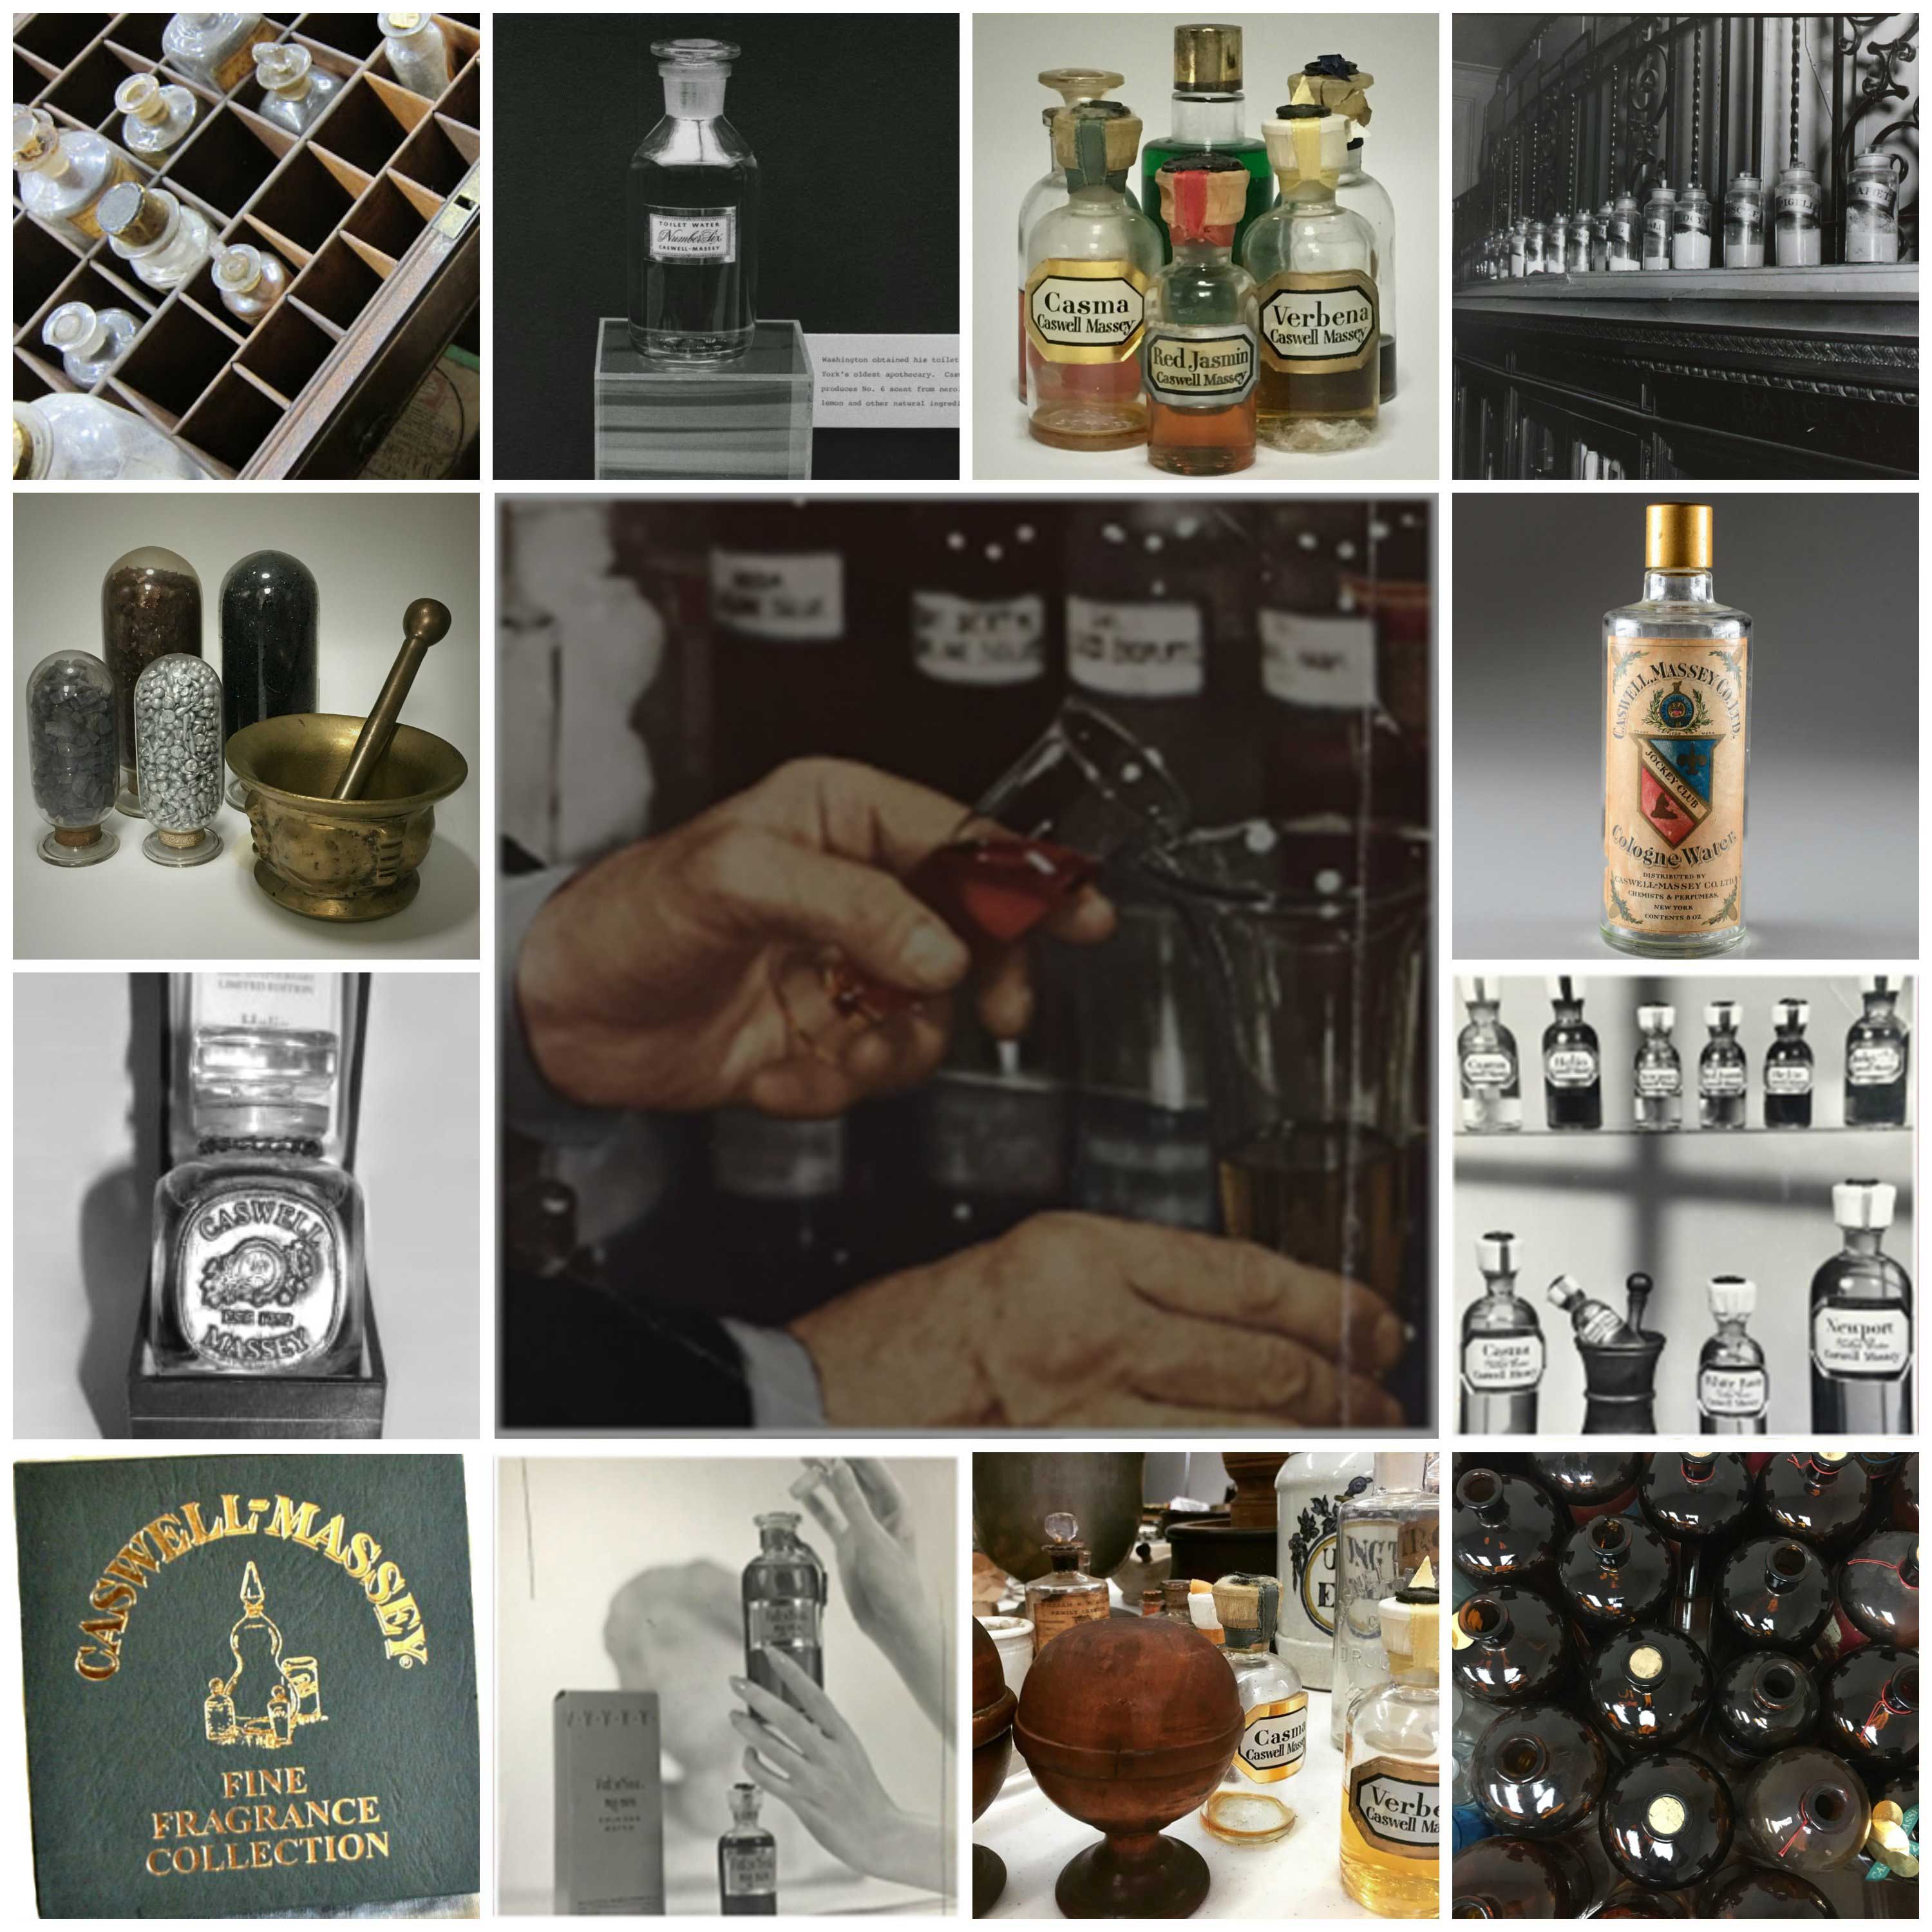 Collage of vintage images of bottles and colognes and apothecary items